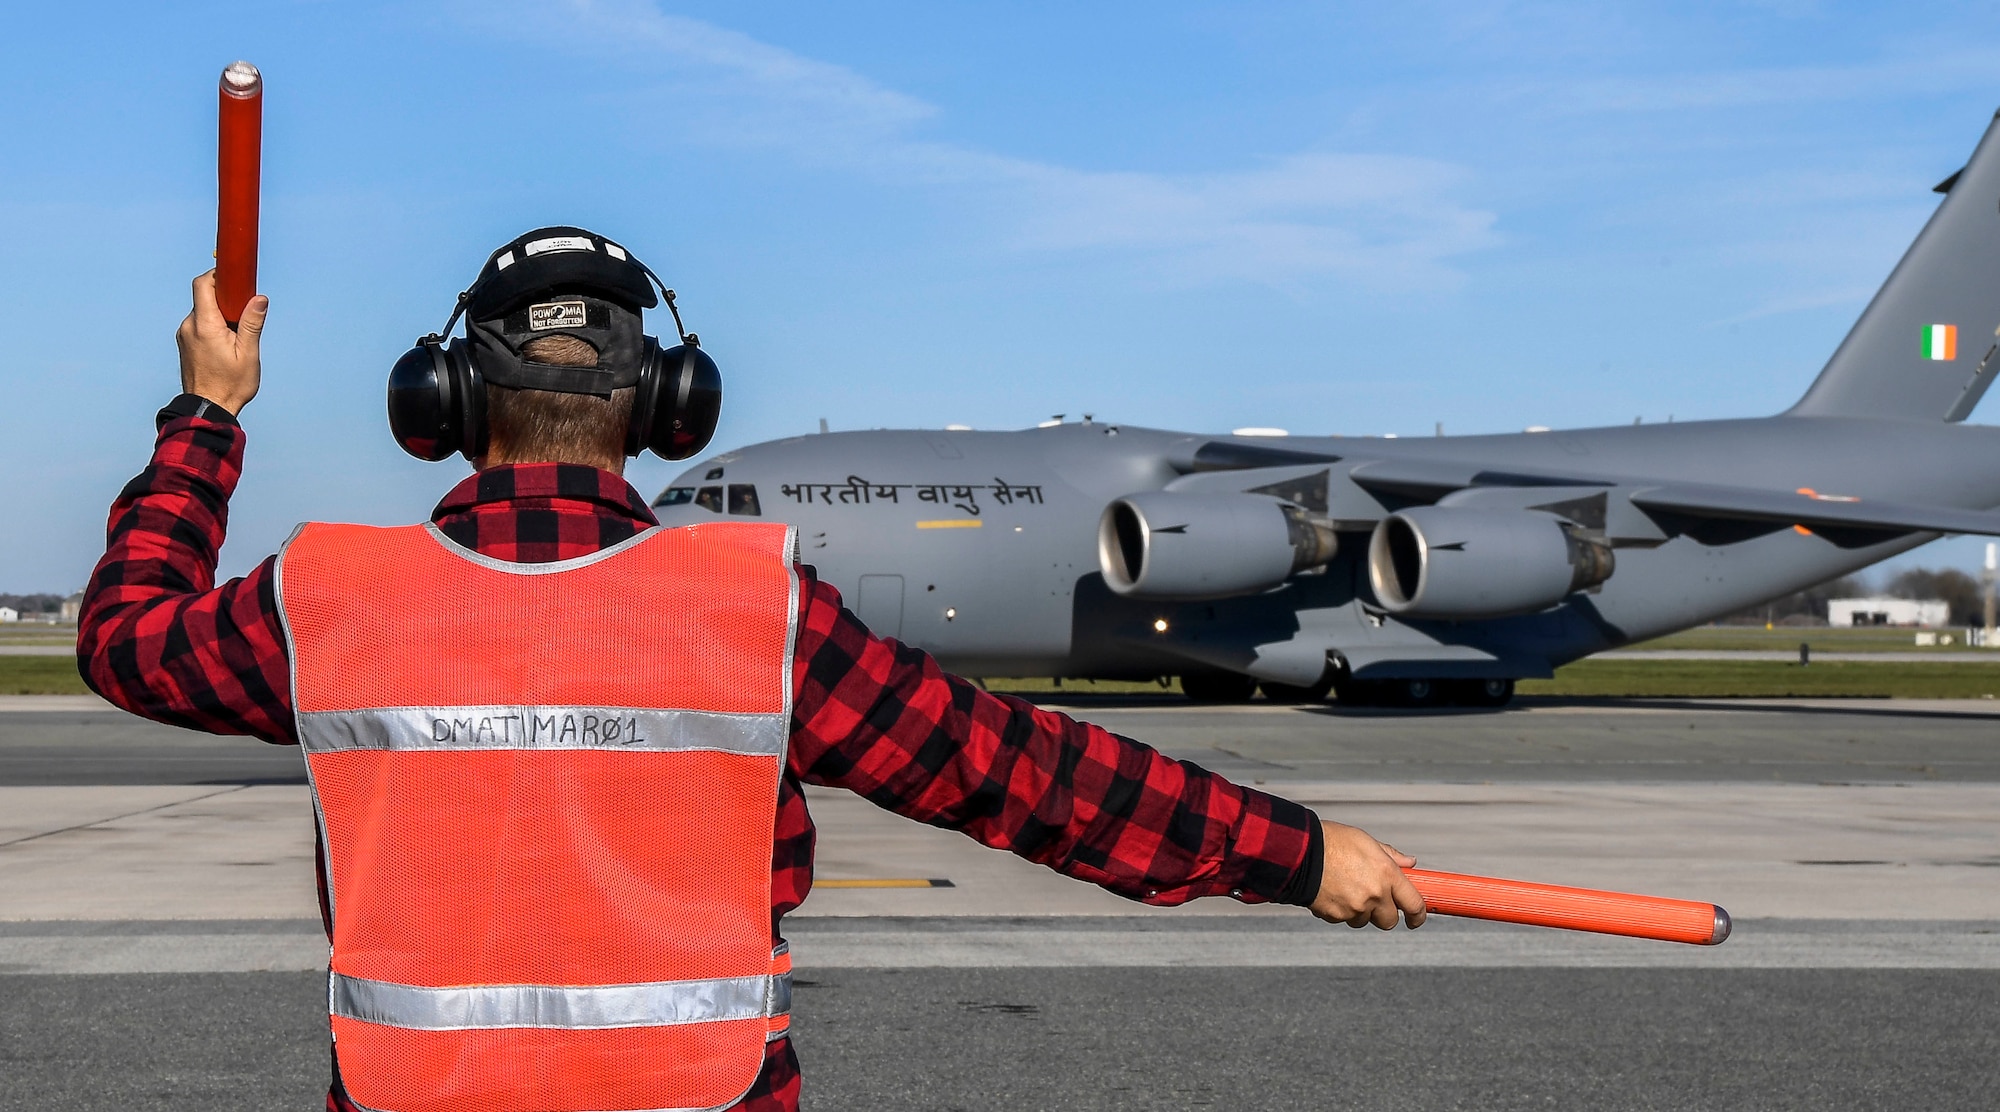 A member of the 436th Aircraft Maintenance Squadron transient alert marshals an Indian air force C-17 Globemaster III Nov. 20, 2020, at Dover Air Force Base, Delaware. Dover AFB annually supports $3.5 billion worth of FMS operations due to its strategic location and 436th Aerial Port Squadron, the largest aerial port in the Department of Defense. The United States and India have shared interests in promoting global security, stability and economic prosperity. (U.S. Air Force photo by Senior Airman Christopher Quail)